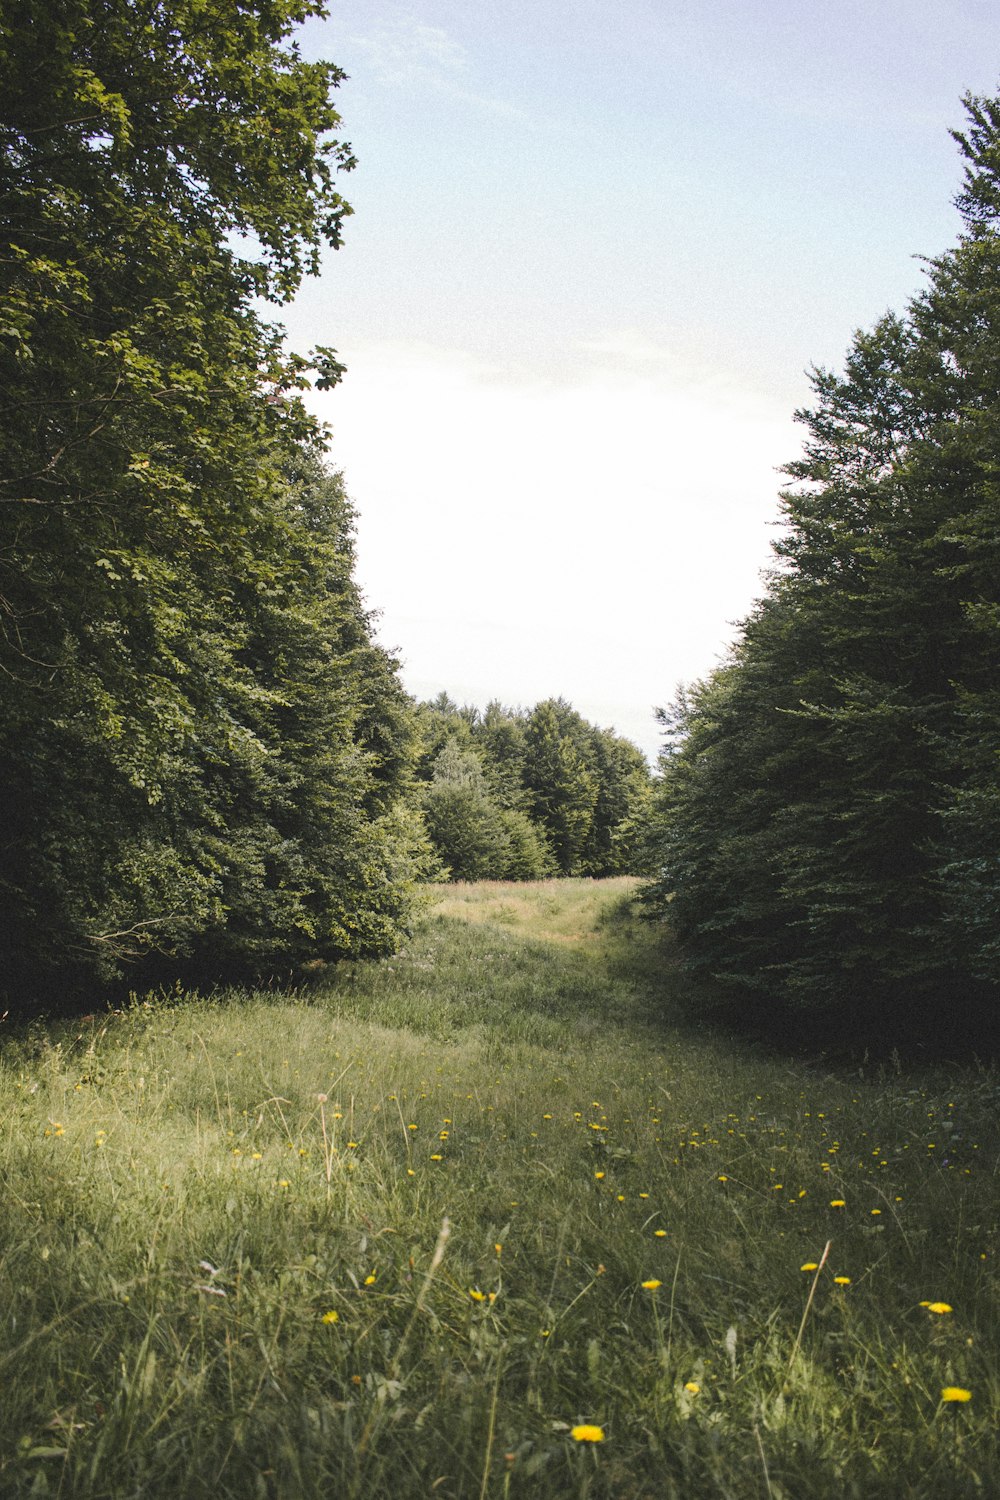 a dirt road surrounded by trees and grass